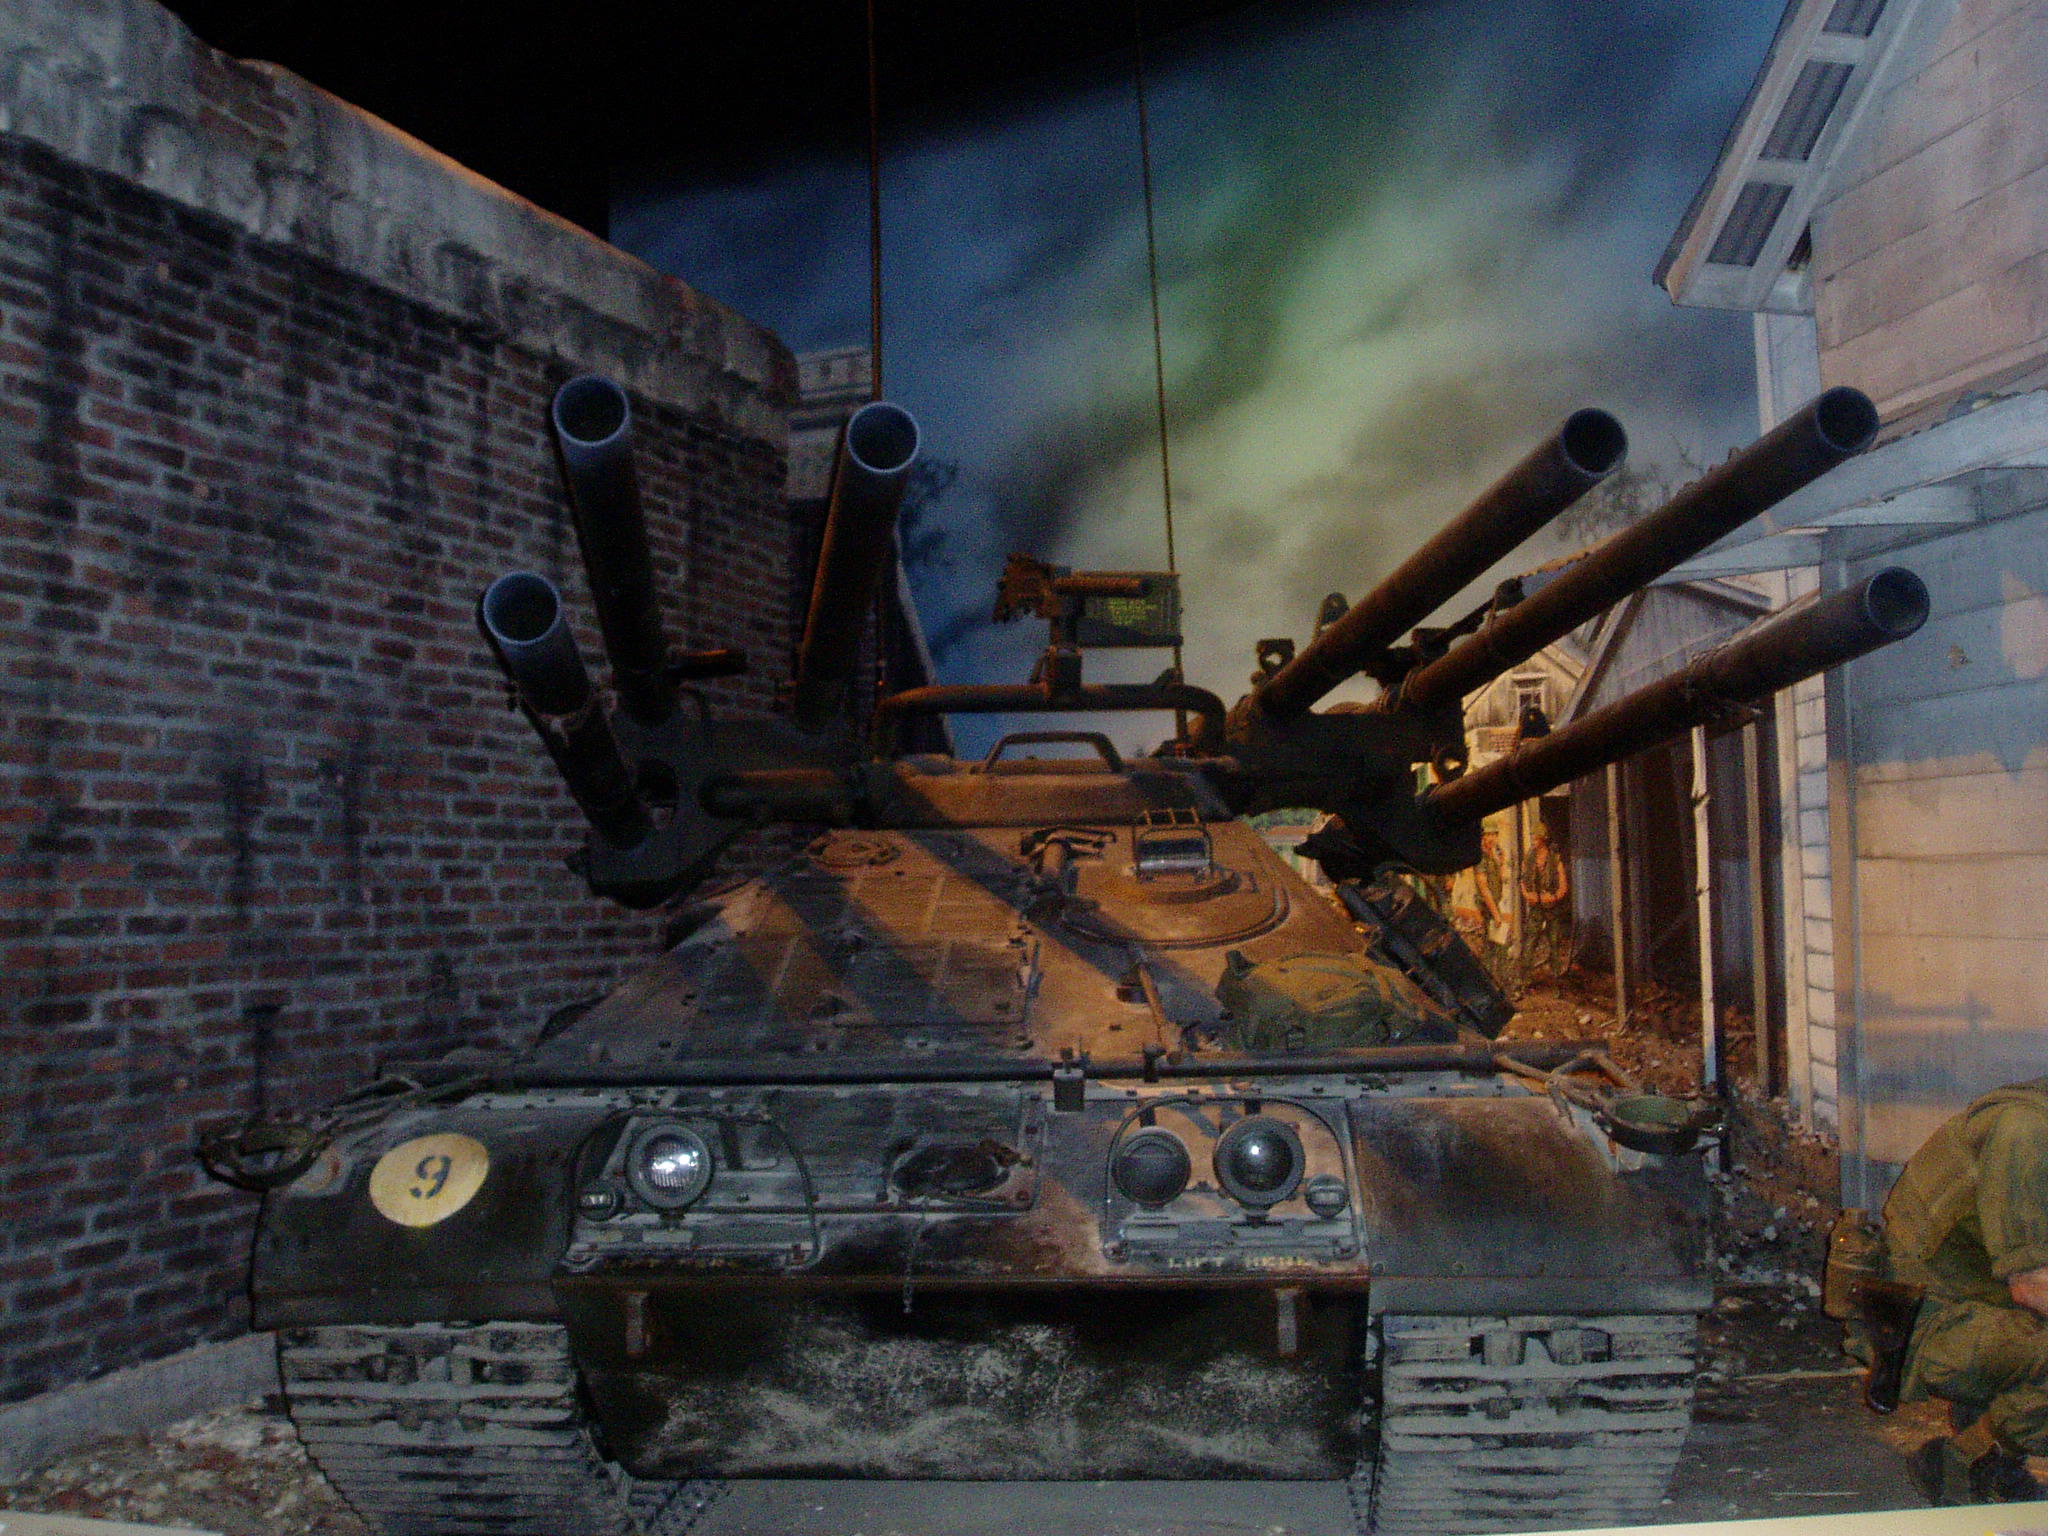 Military M50 Ontos HD Wallpaper | Background Image